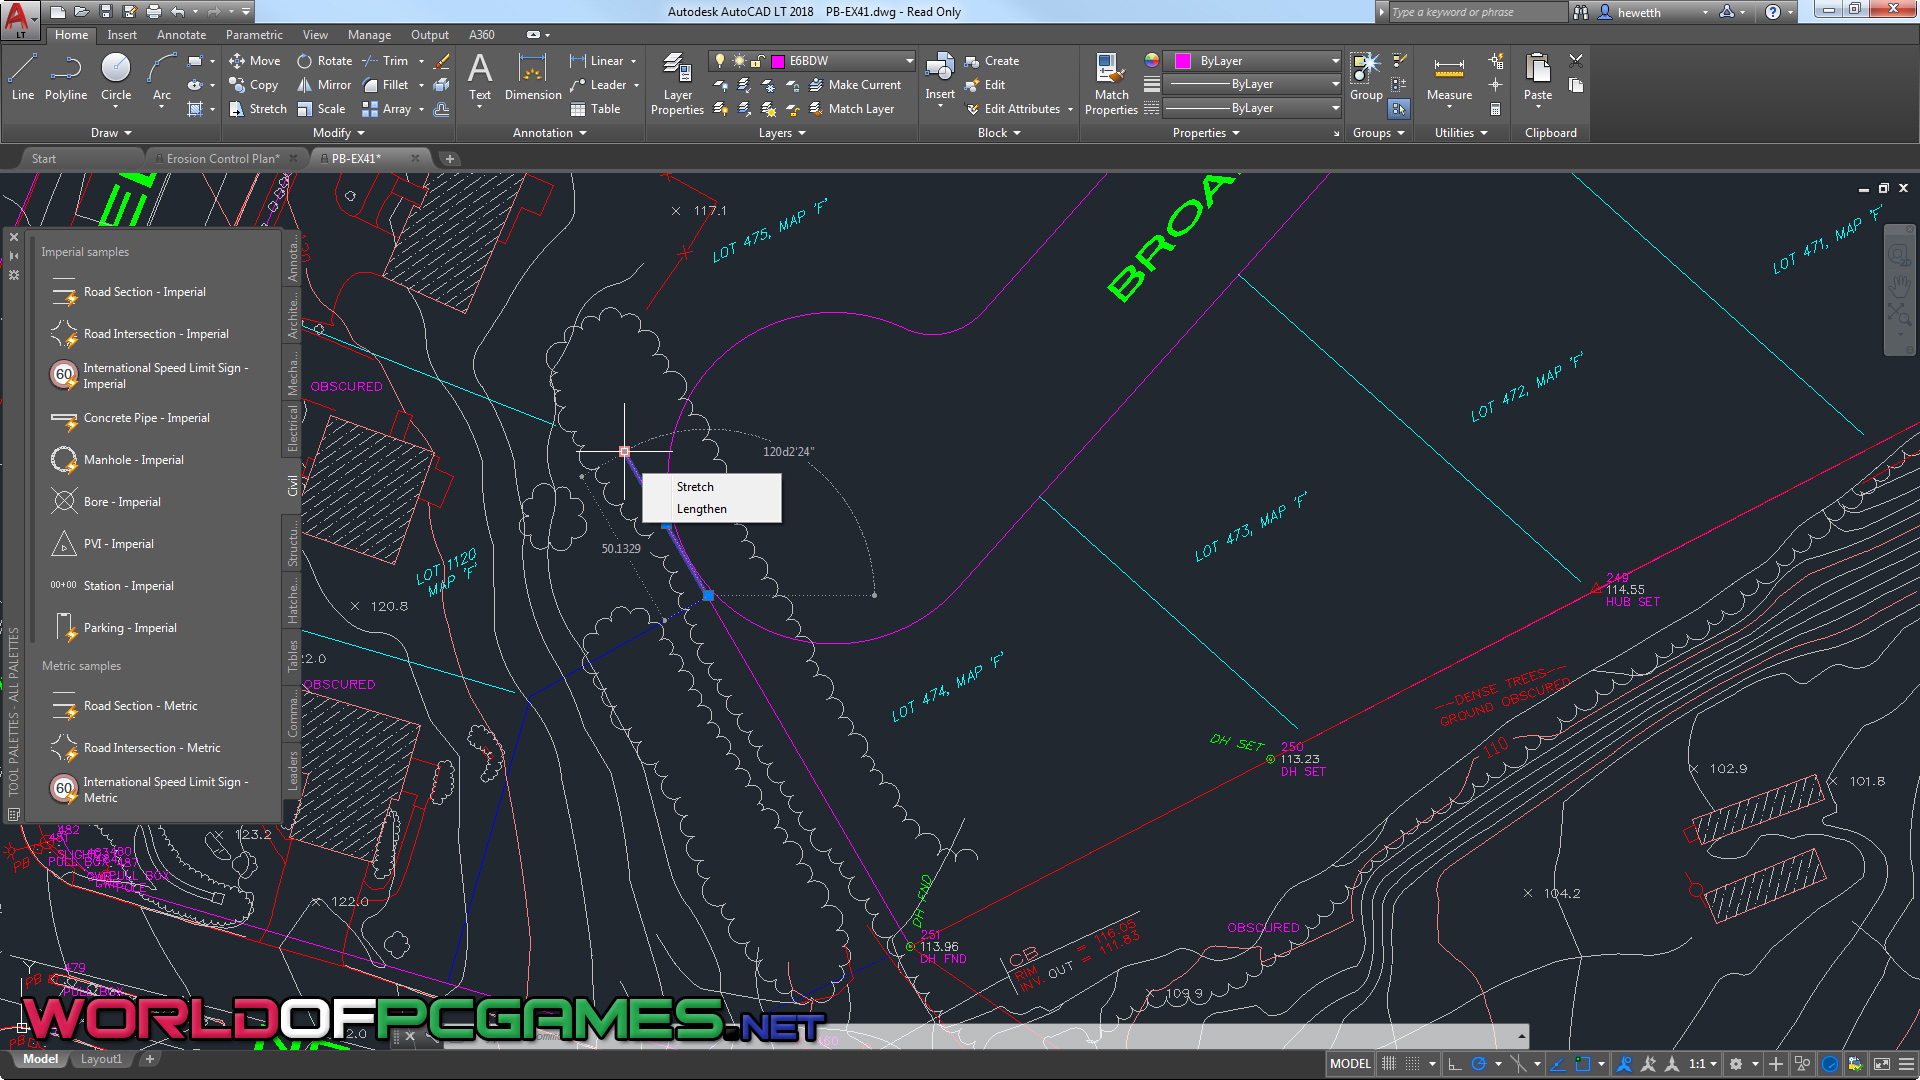 autocad for mac free download full version